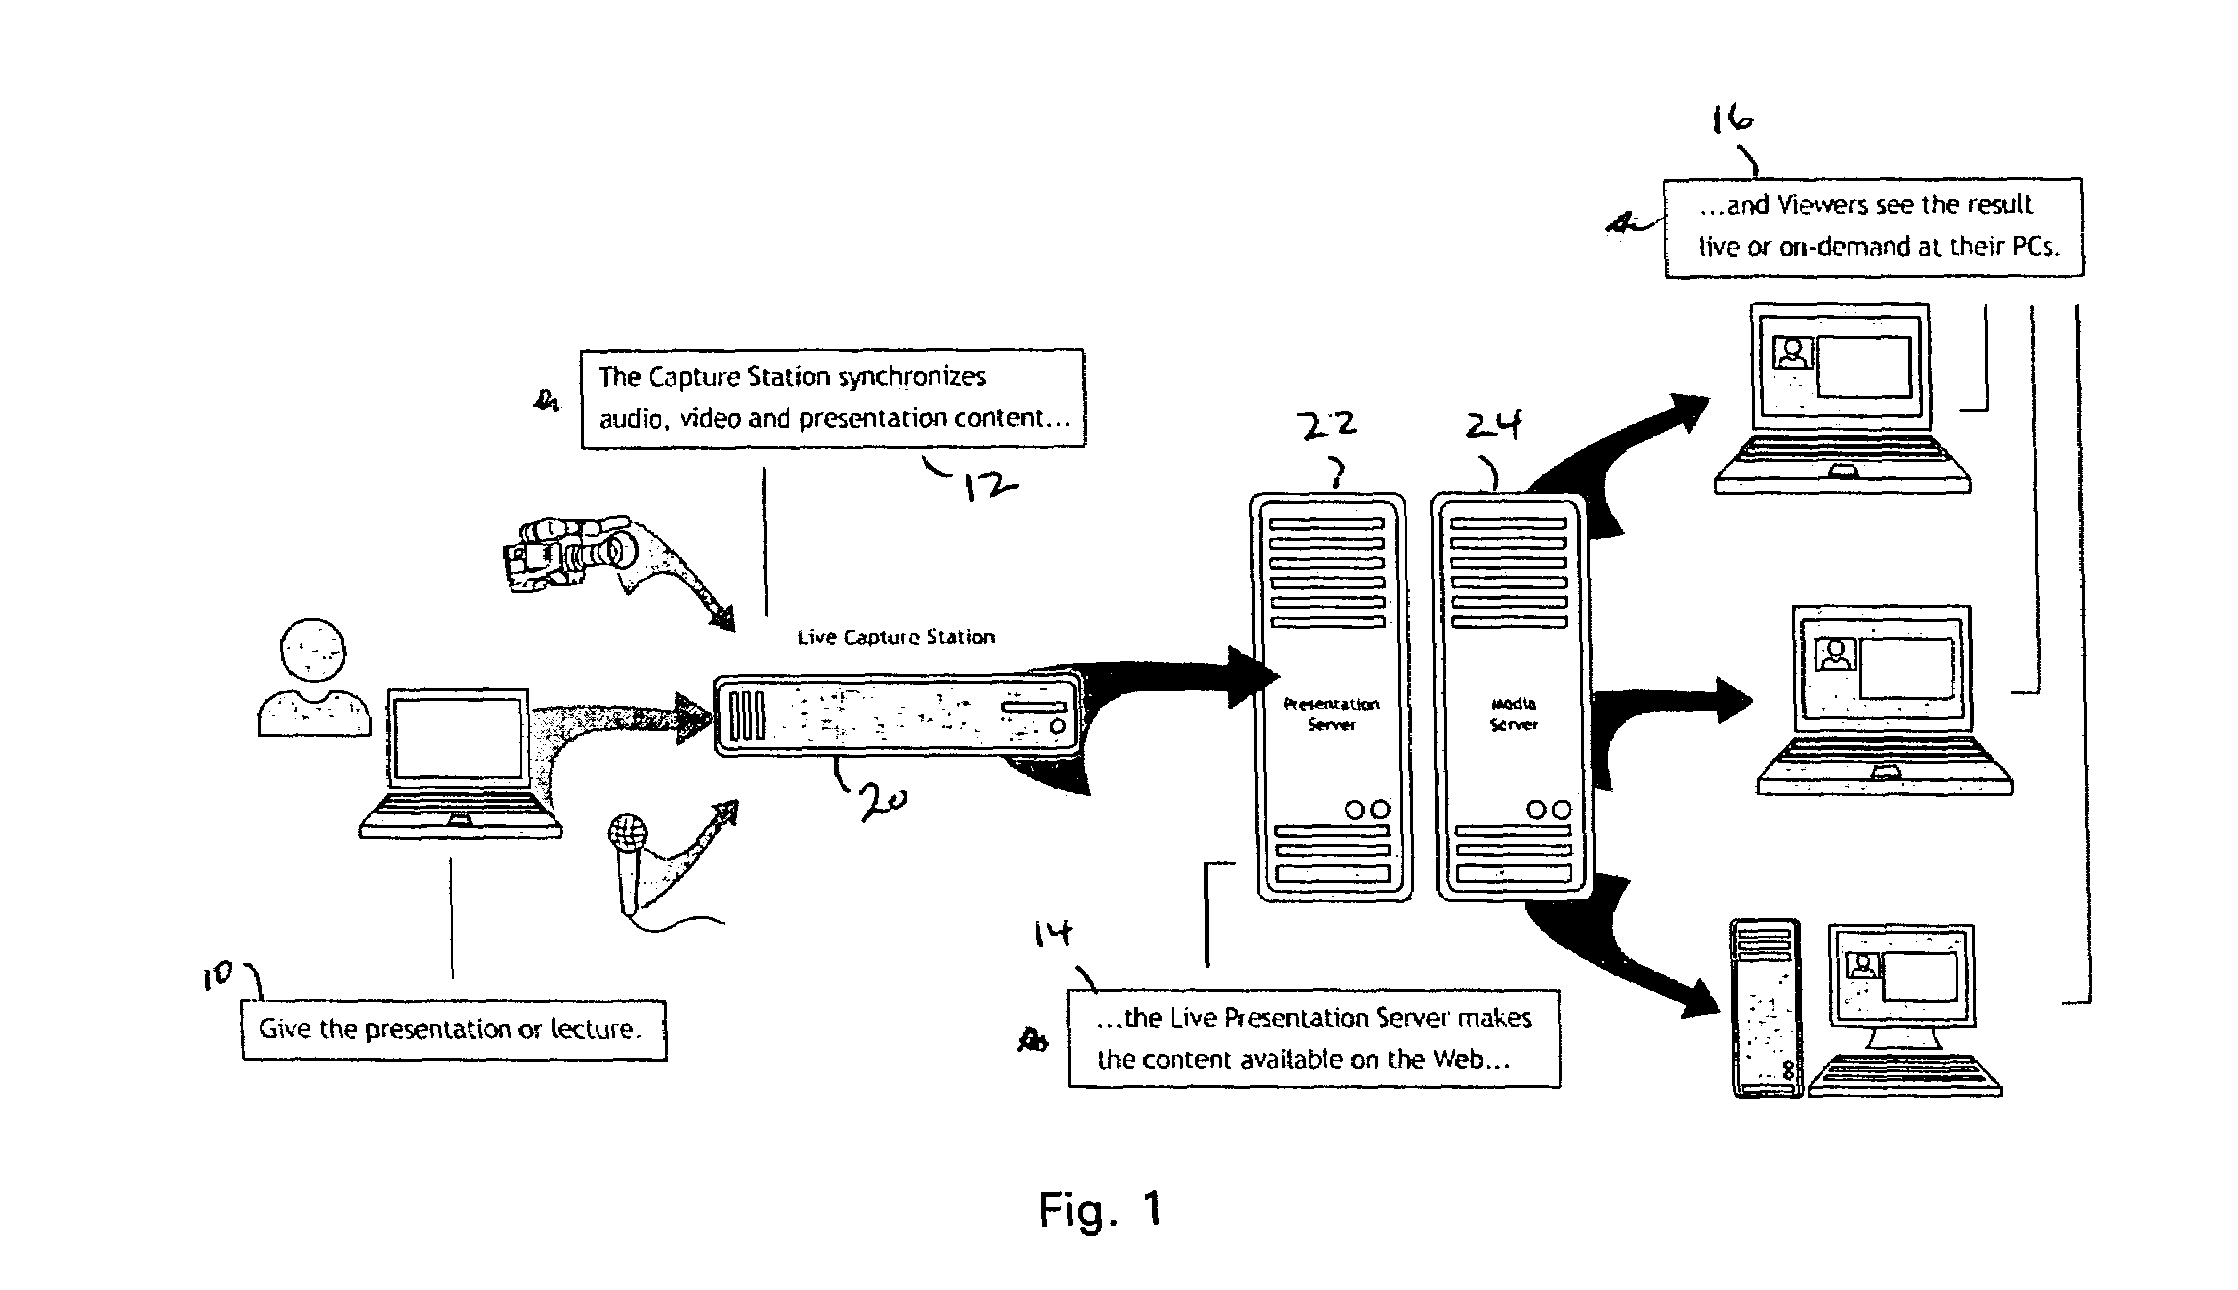 Rich media event production system and method including the capturing, indexing, and synchronizing of RGB-based graphic content